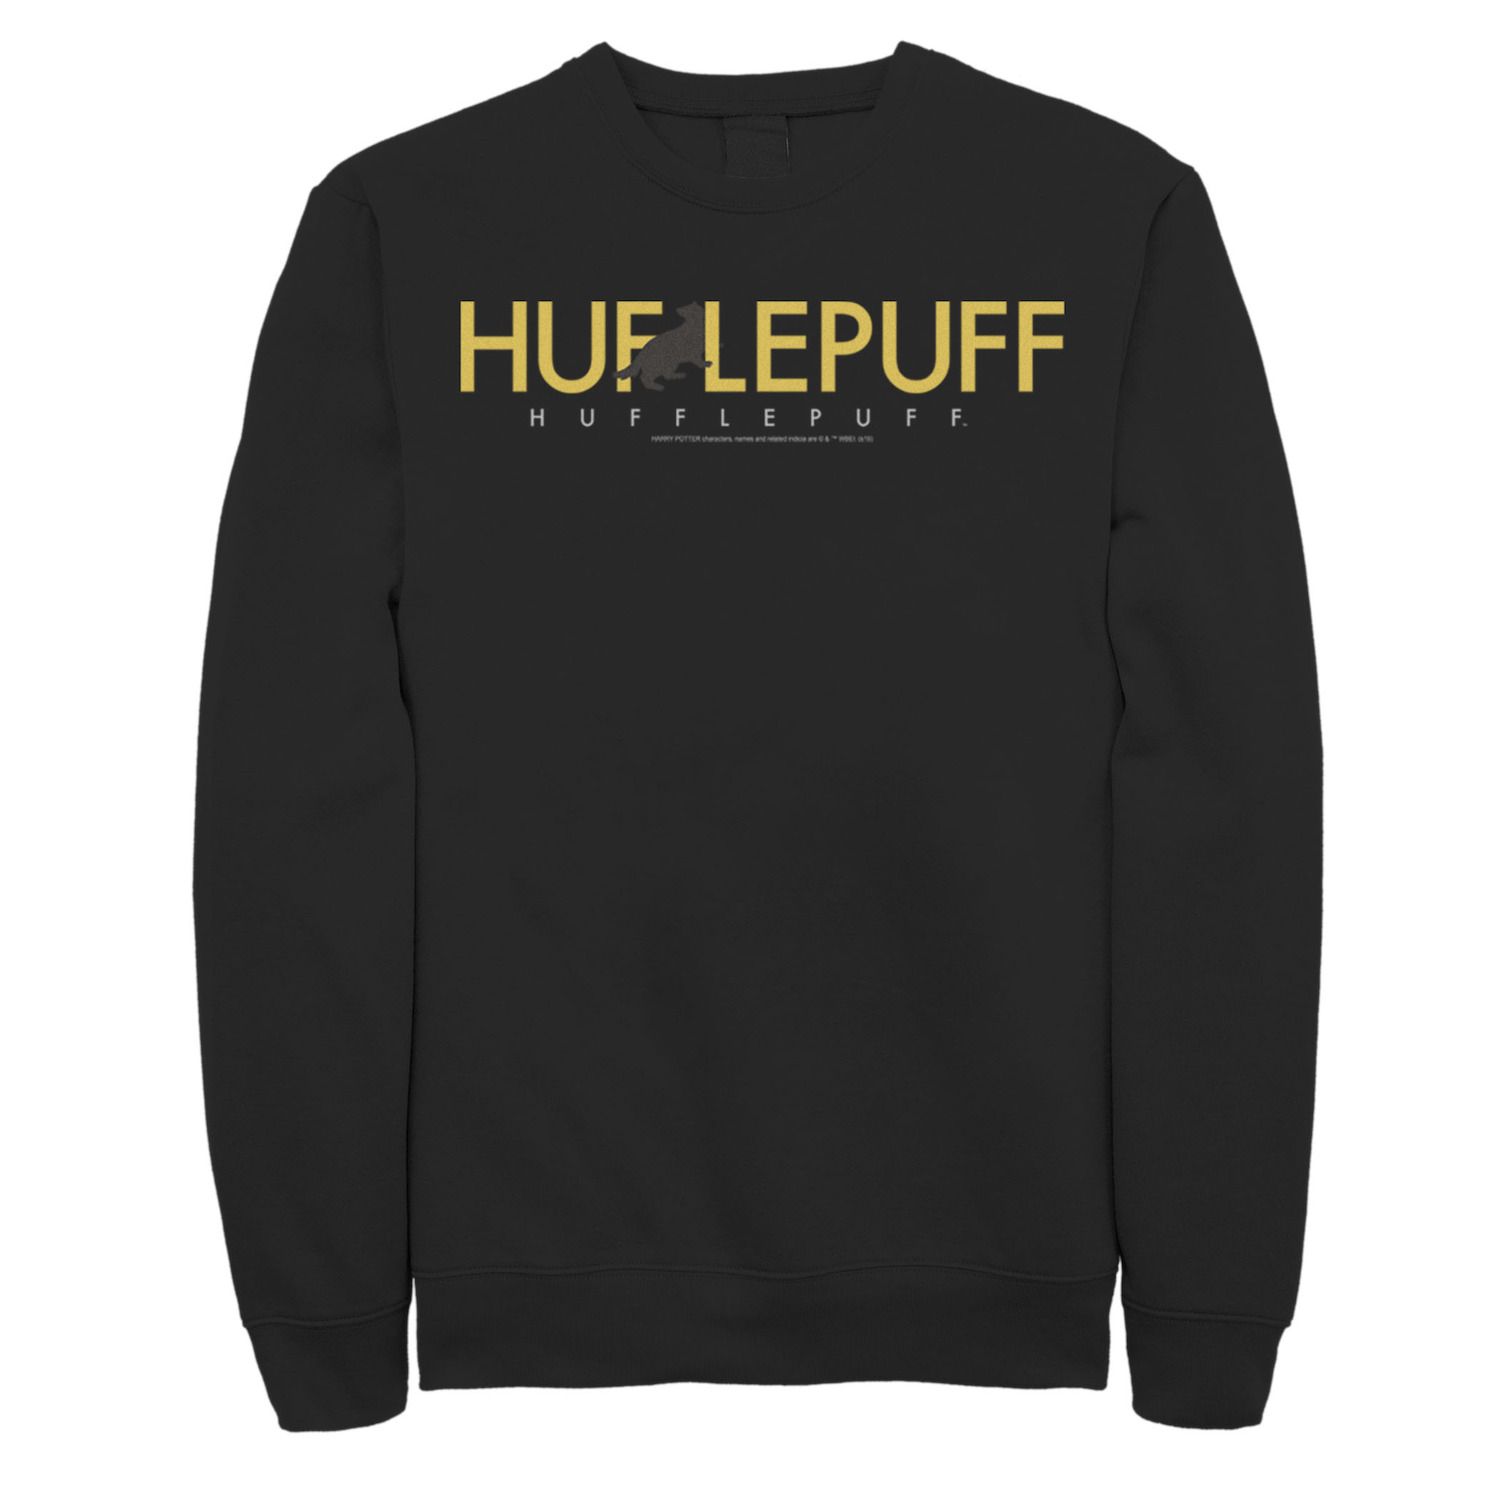 Image for Harry Potter Men's House Hufflepuff Simple Text Pullover Sweatshirt at Kohl's.